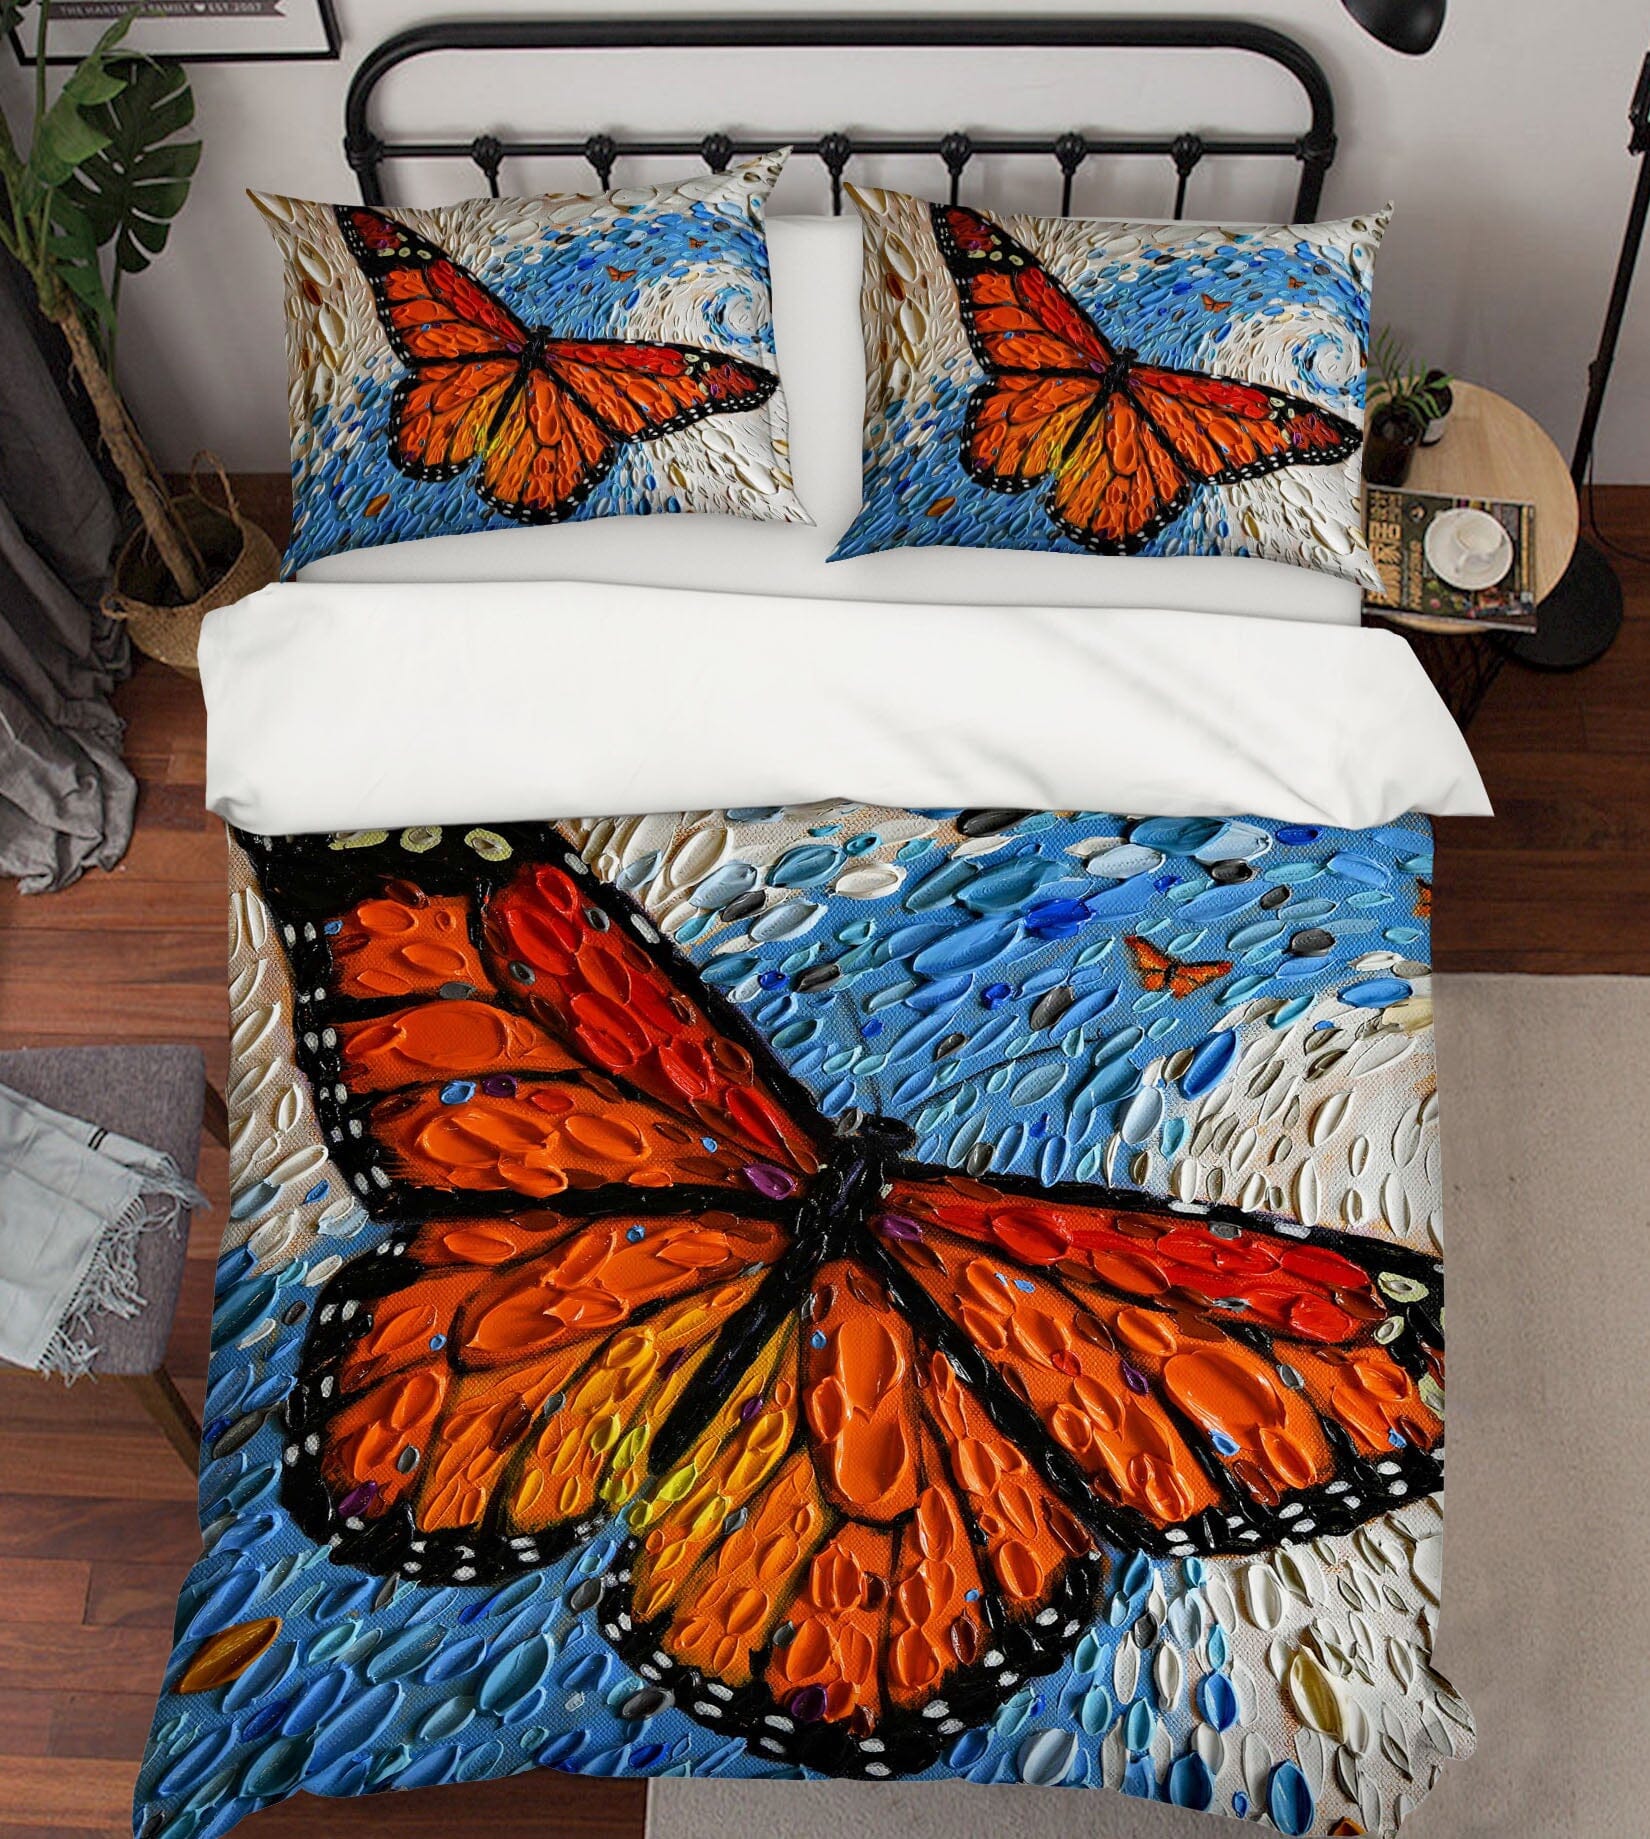 3D Flower Butterfly 2123 Dena Tollefson bedding Bed Pillowcases Quilt Quiet Covers AJ Creativity Home 